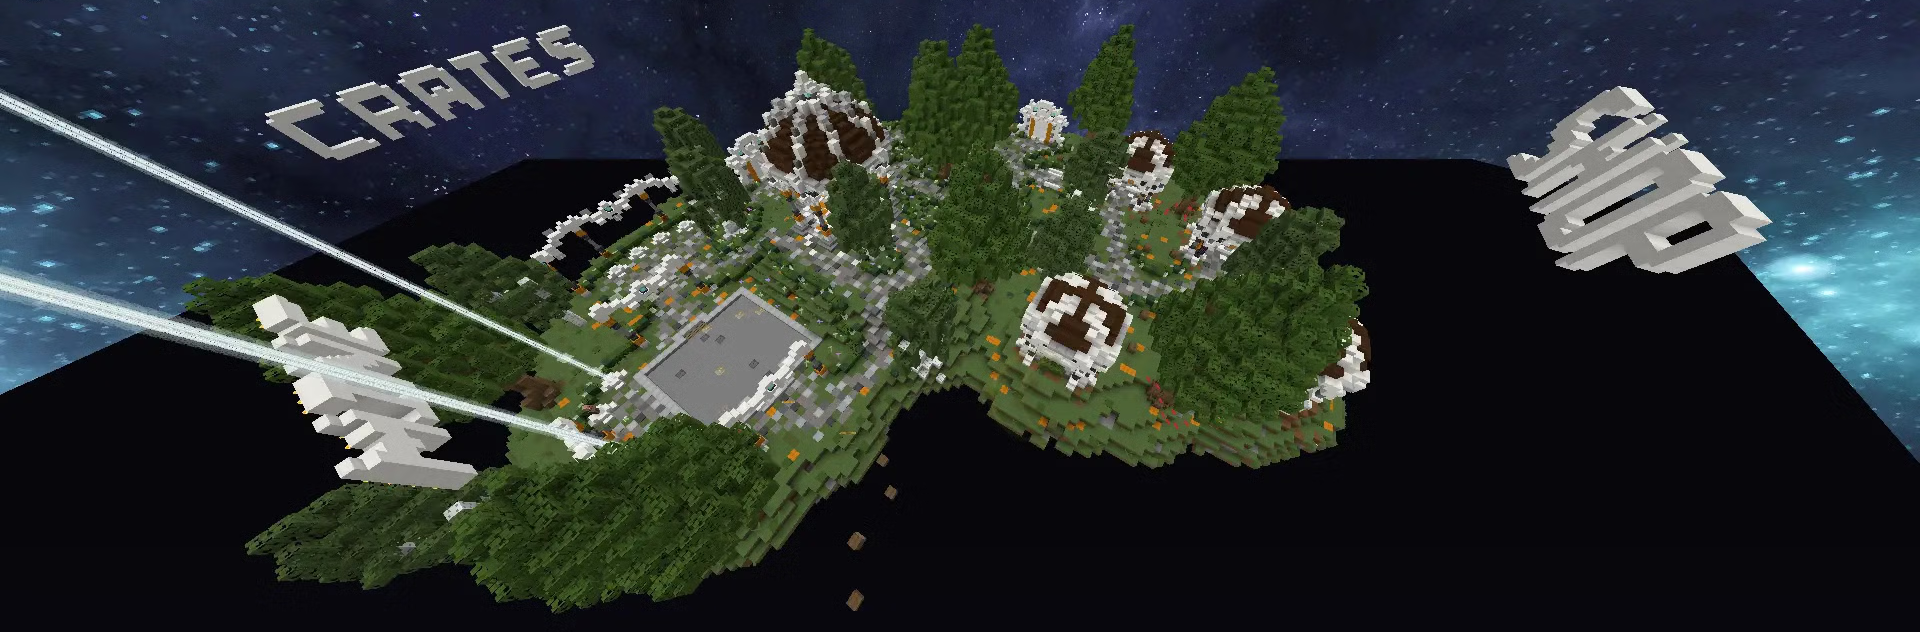 Our Flagship - Skyblock!